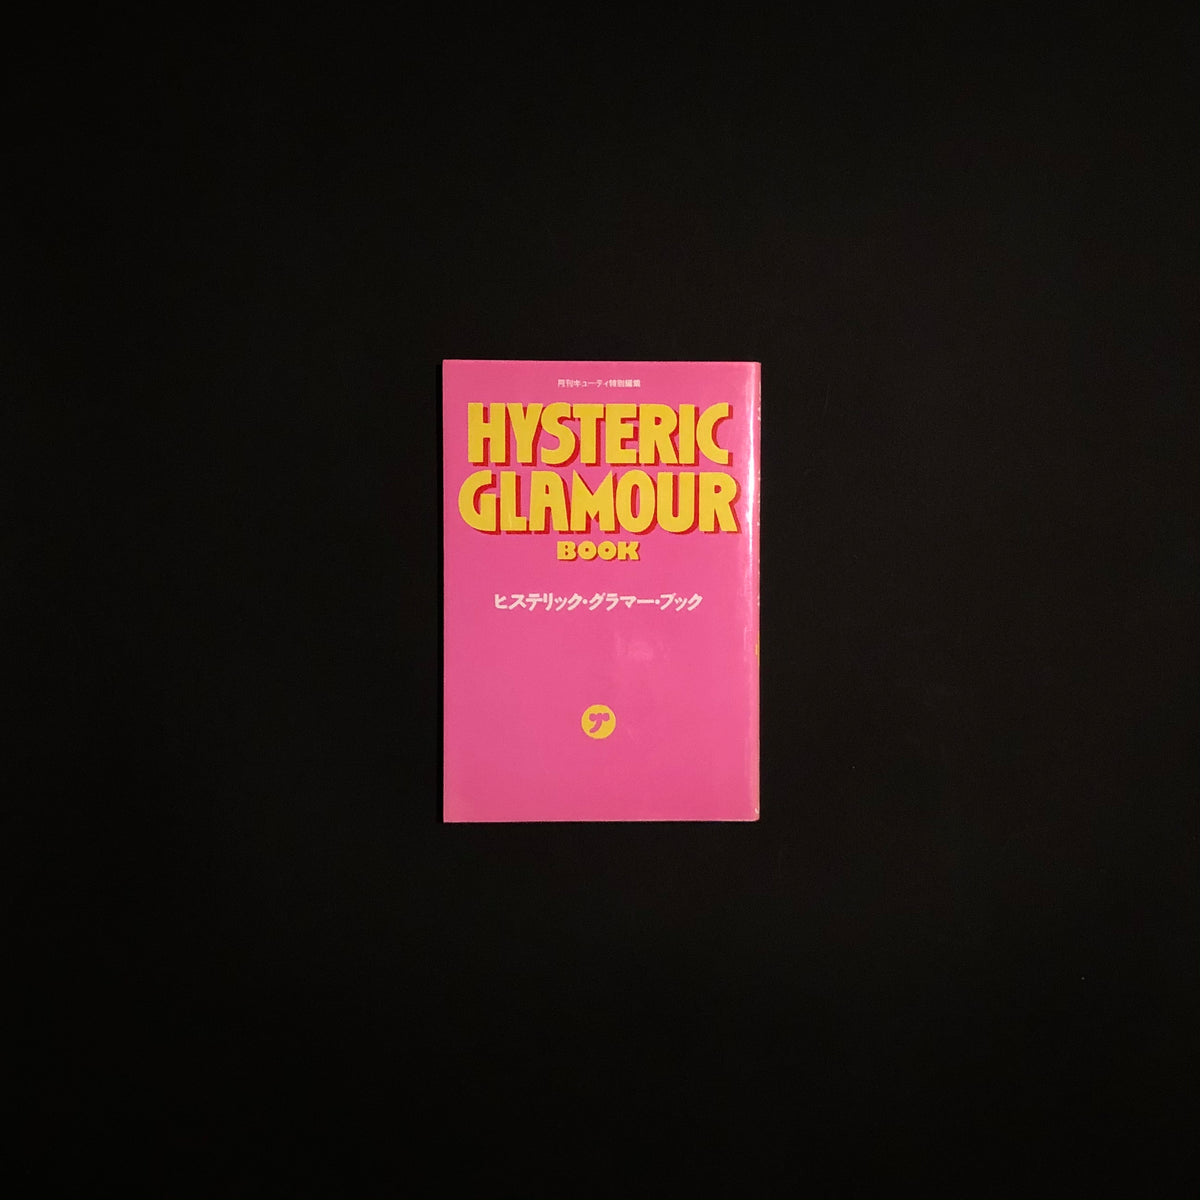 HYSTERIC GLAMOUR BOOK